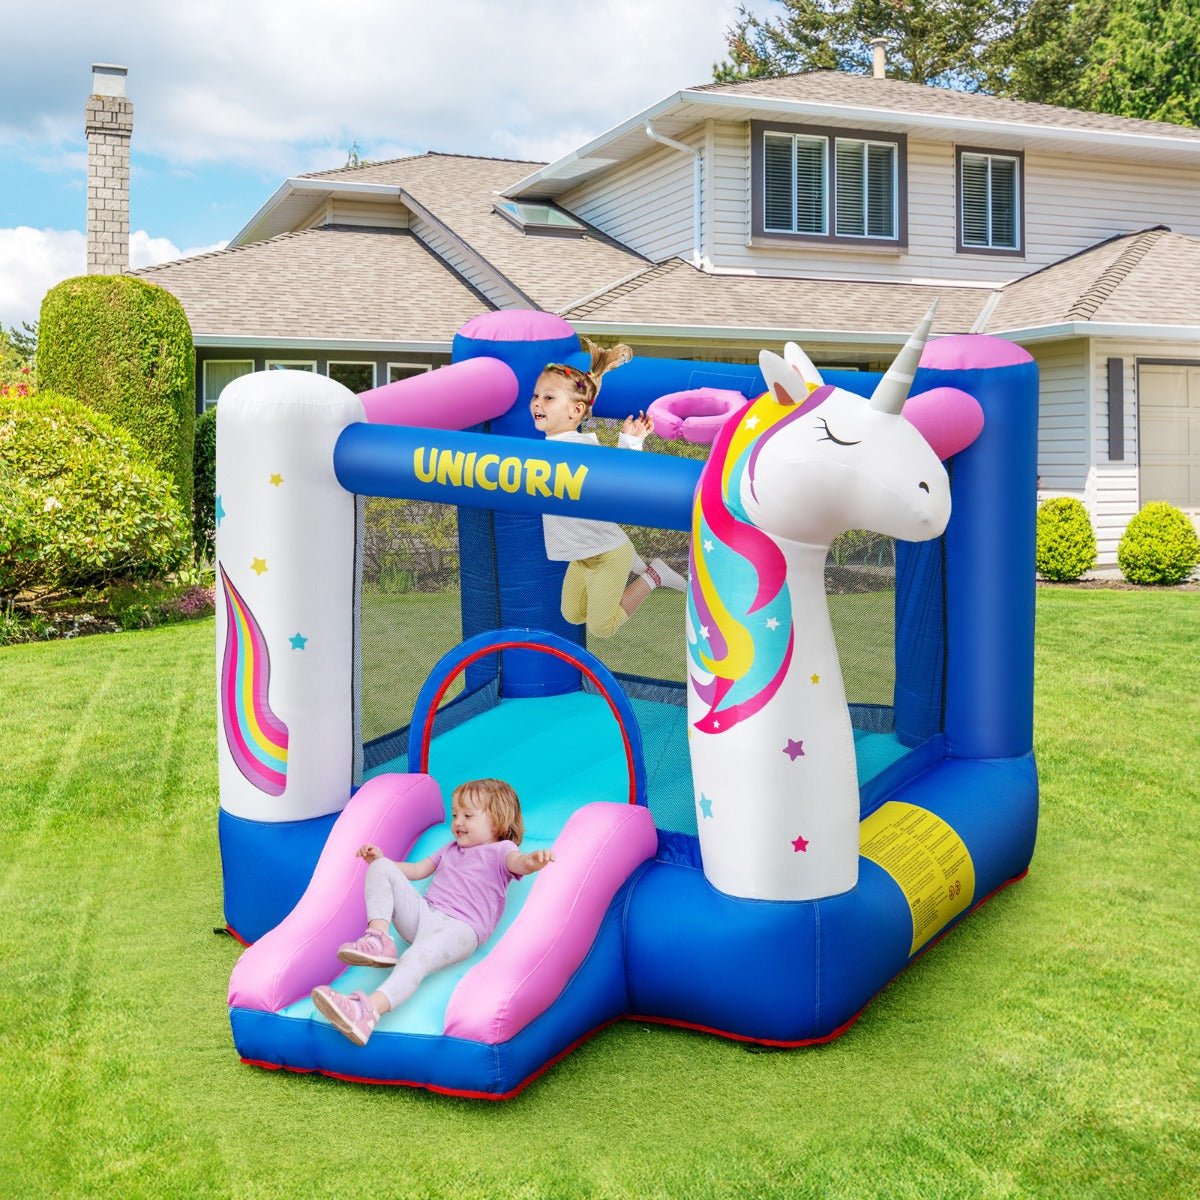 Kids Unicorn Theme Bounce House - Slide, Hoop, and Play (Blower Included)